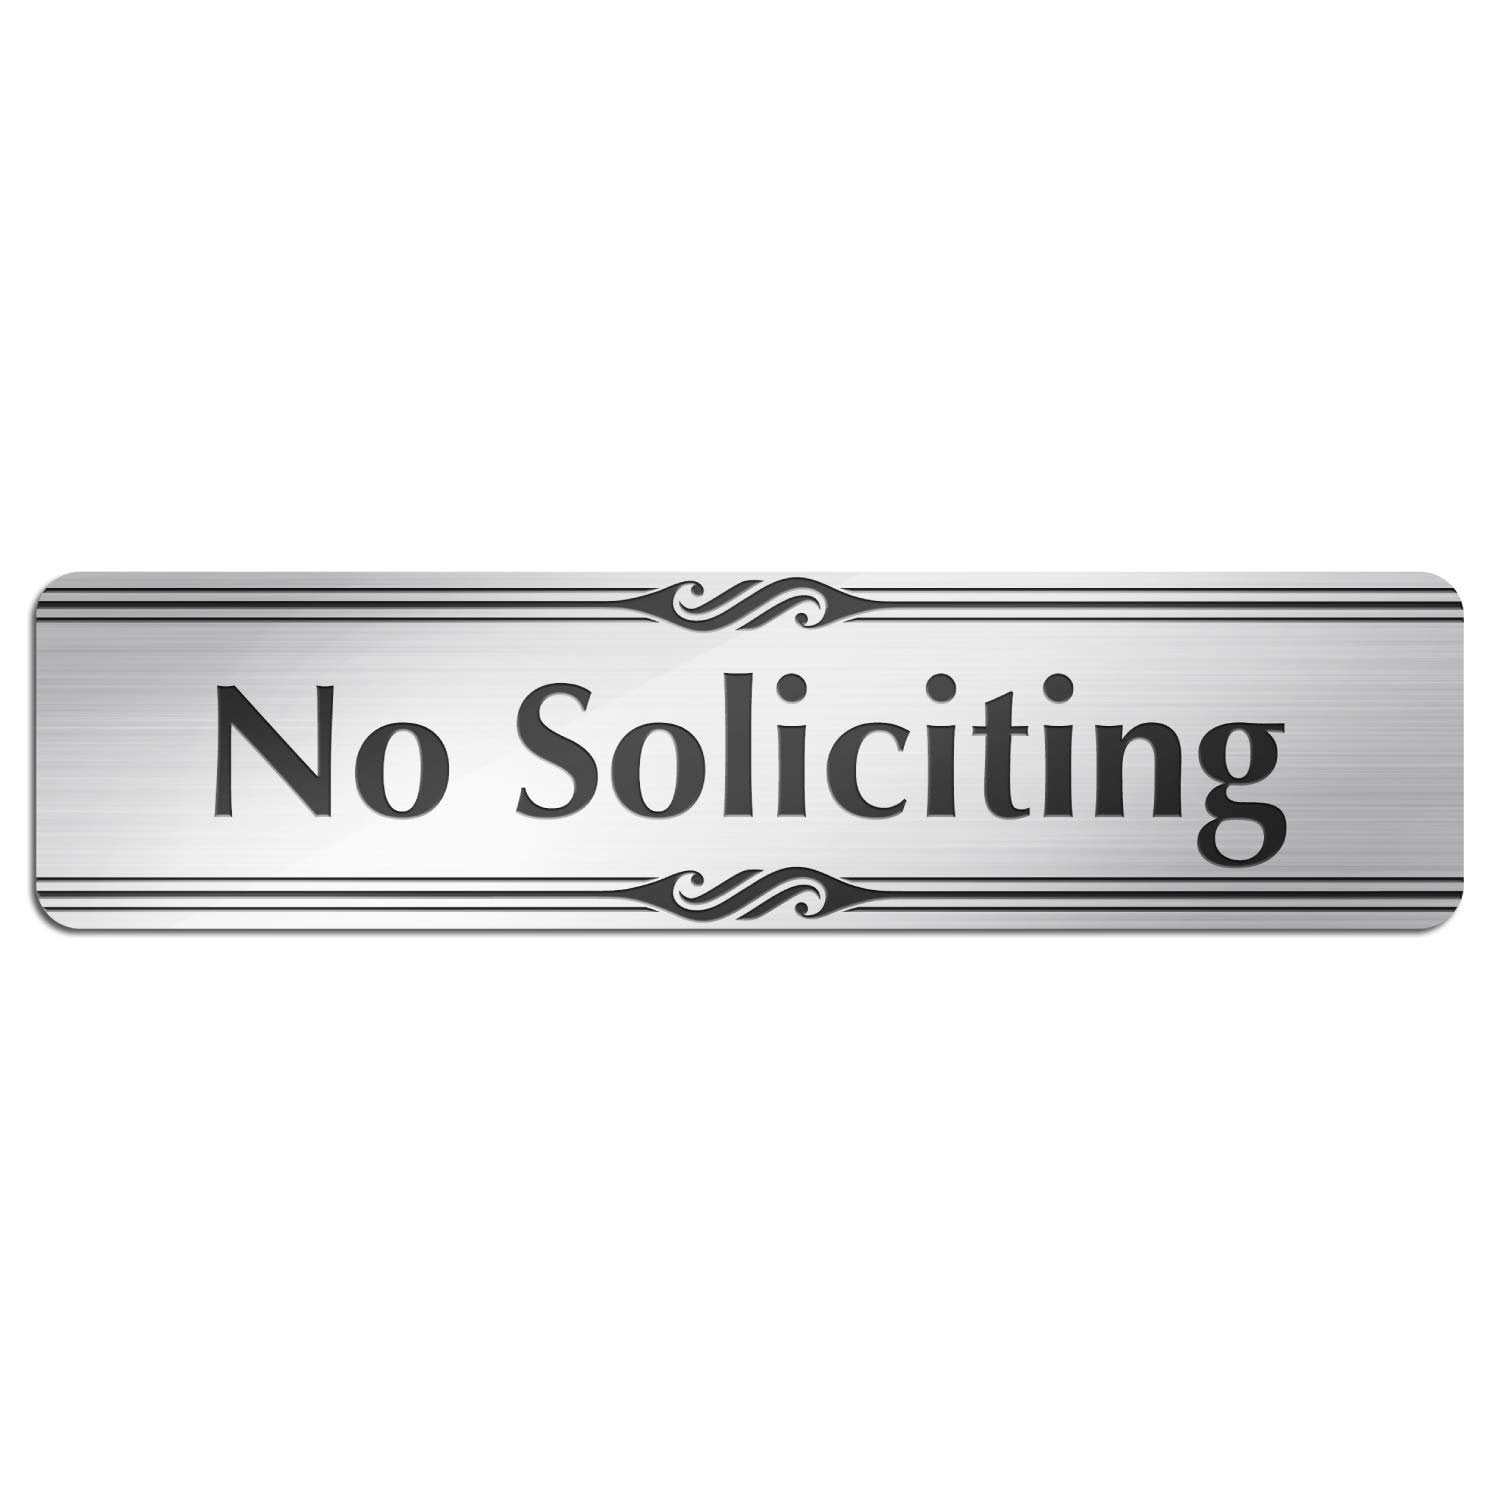 Laser Engraved Acrylic No Soliciting Sign Brown Wood Grain with White Lettering 